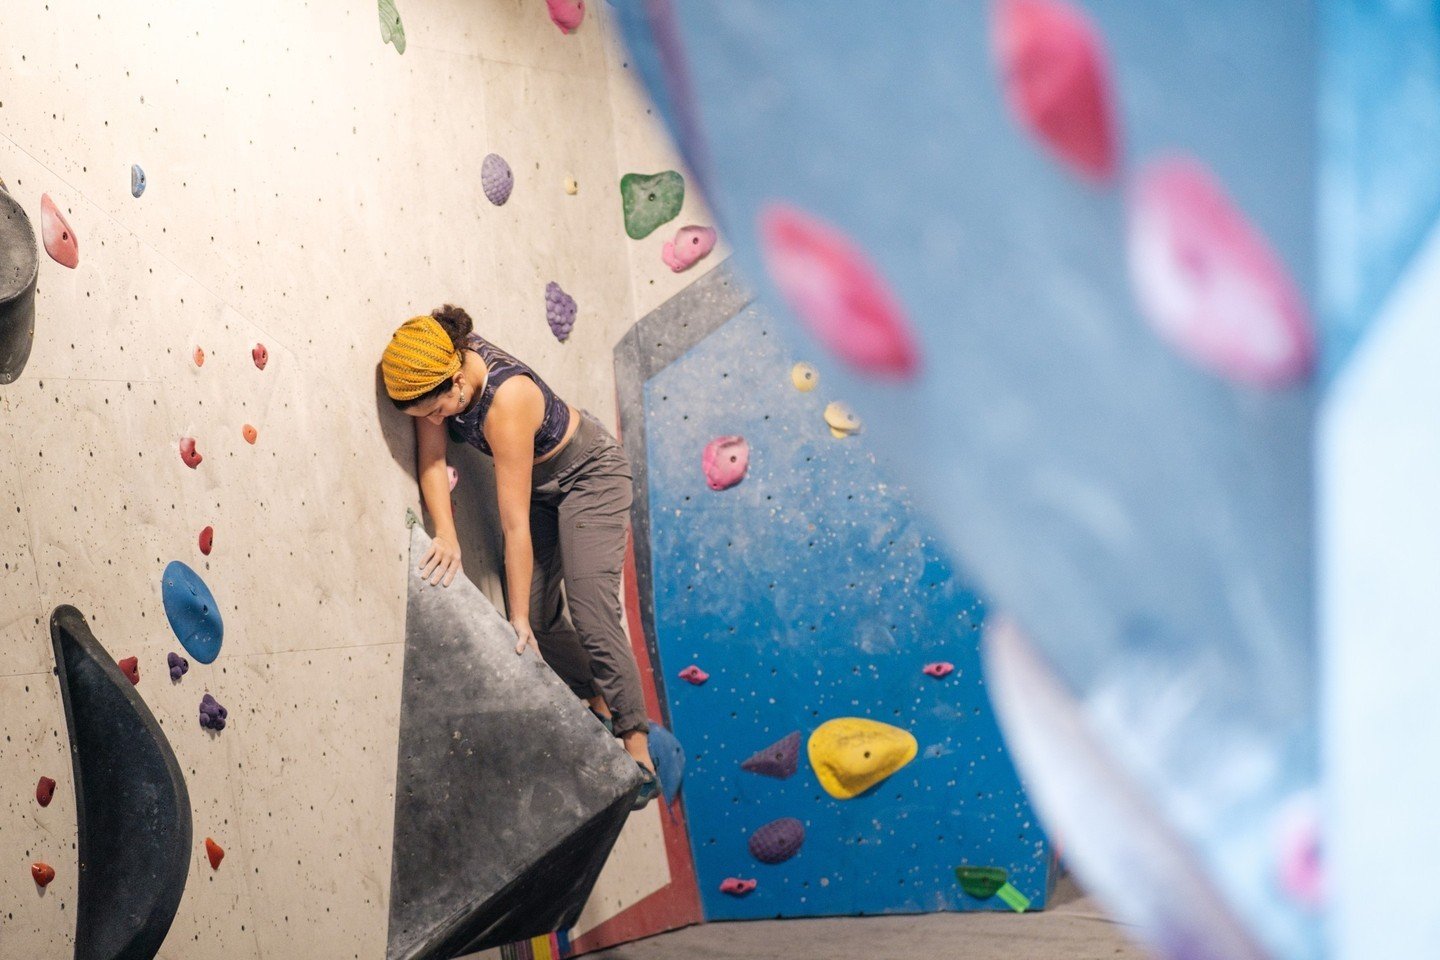 Signing up for a competition can feel a lot like trusting your feet on slab.⁠
⁠
Scary as heck.⁠
⁠
Though, after trying, it can feel the most rewarding.⁠
⁠
Our Downtown Throwdown climbing comp is a great time to start rewarding yourself.⁠
⁠
And here i